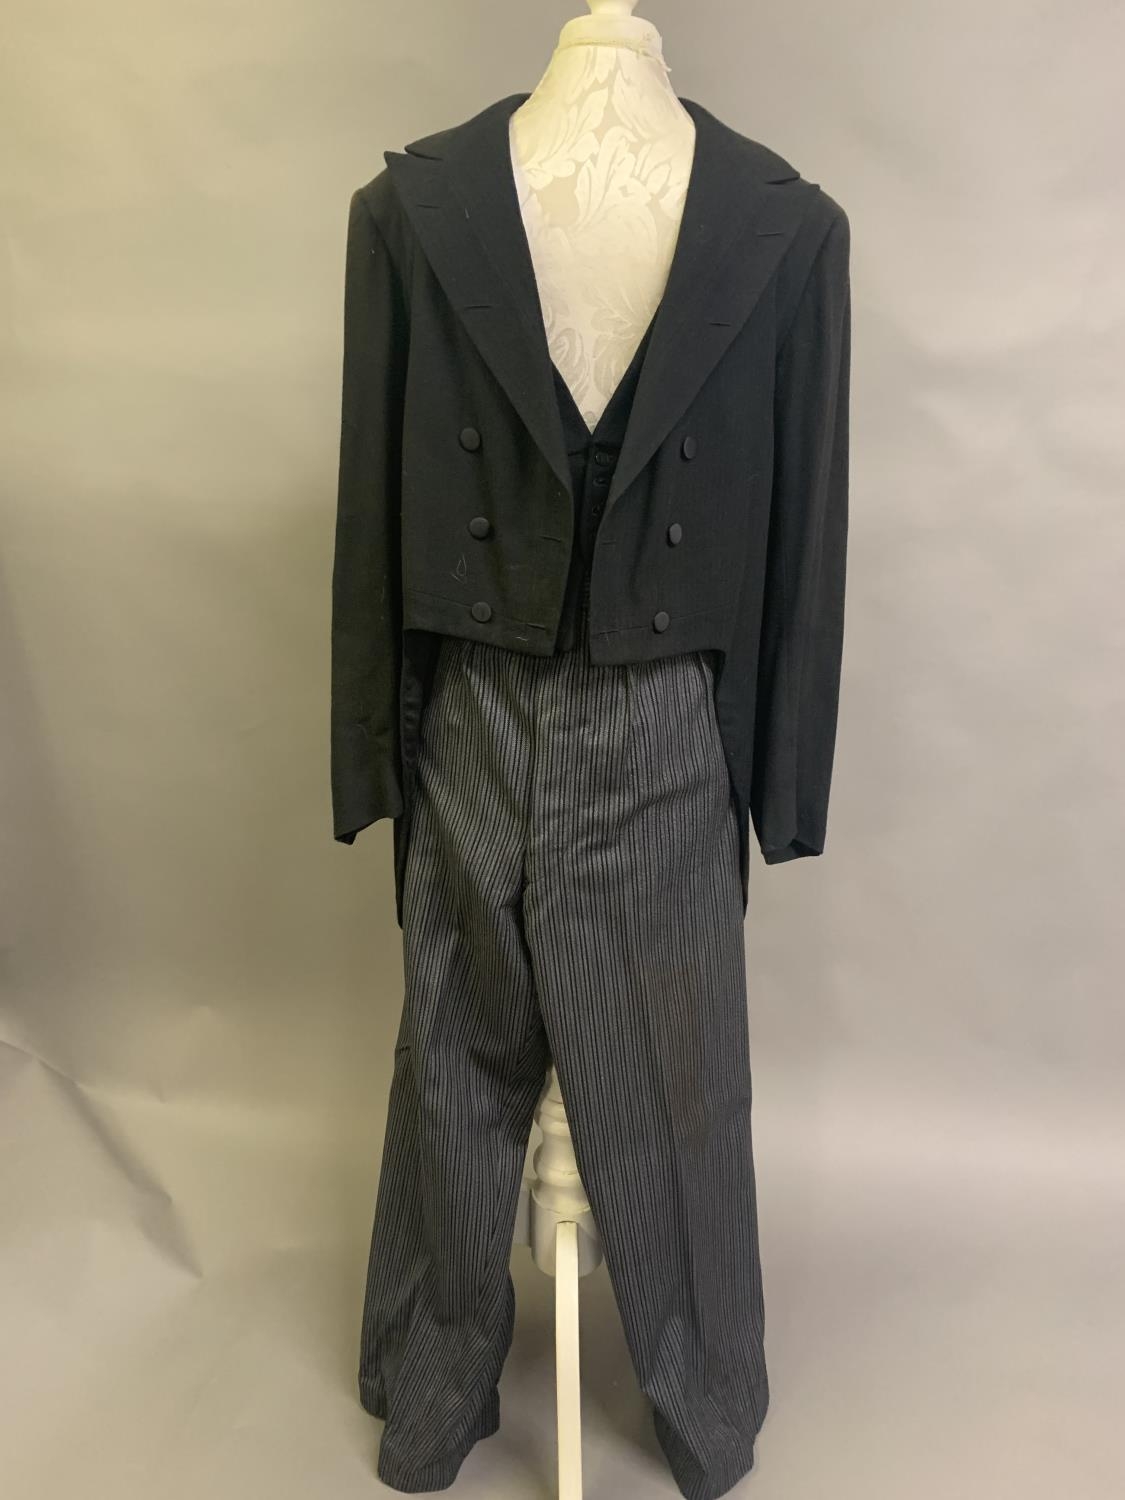 A gentleman’s vintage 3-piece morning suit with striped trousers and waistcoat, fairly large size